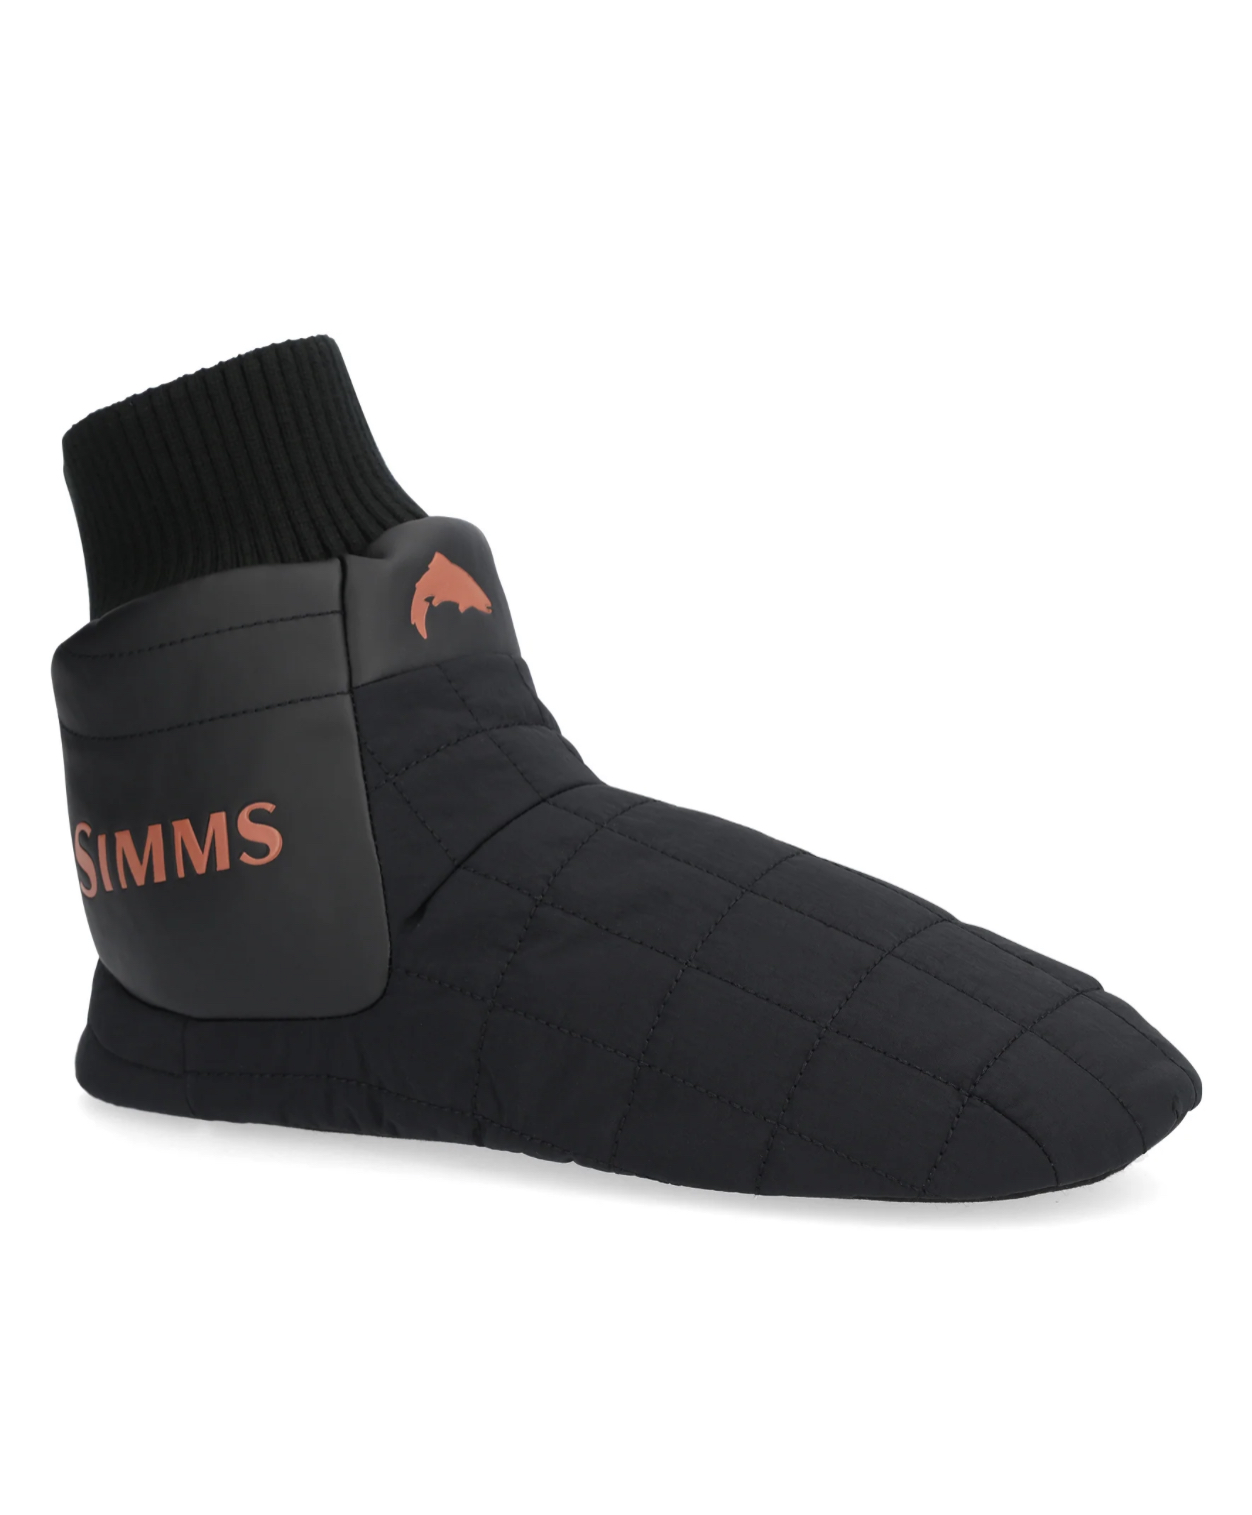 Simms Fishing Bulkley Insulated Bootie